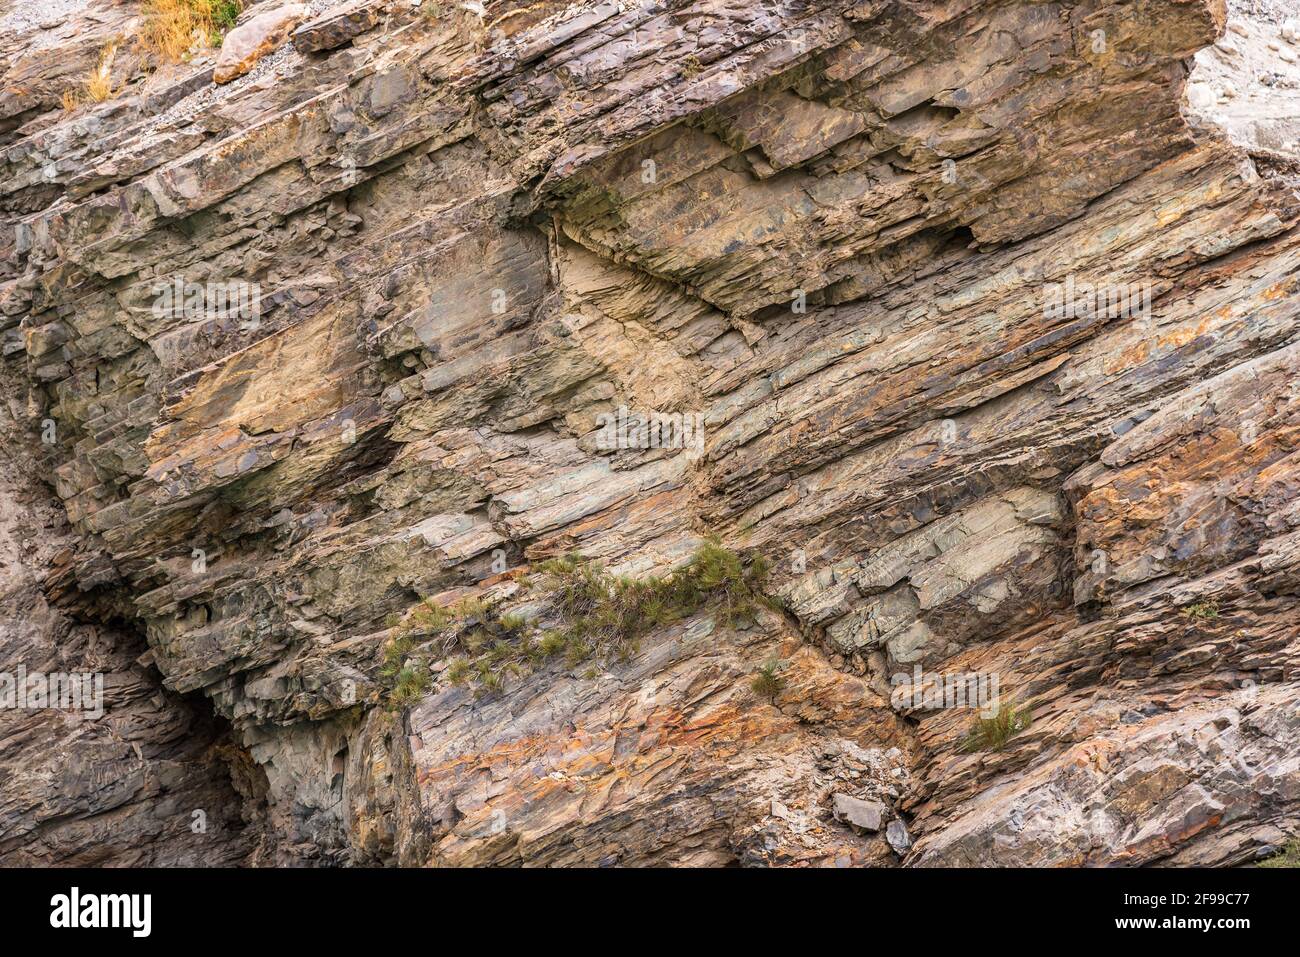 Strata of Mudrocks, it is a silicicastic sedimentary rock include siltstone, claystone, mudstone, slate & shale formed by accumulated sedimentation th Stock Photo